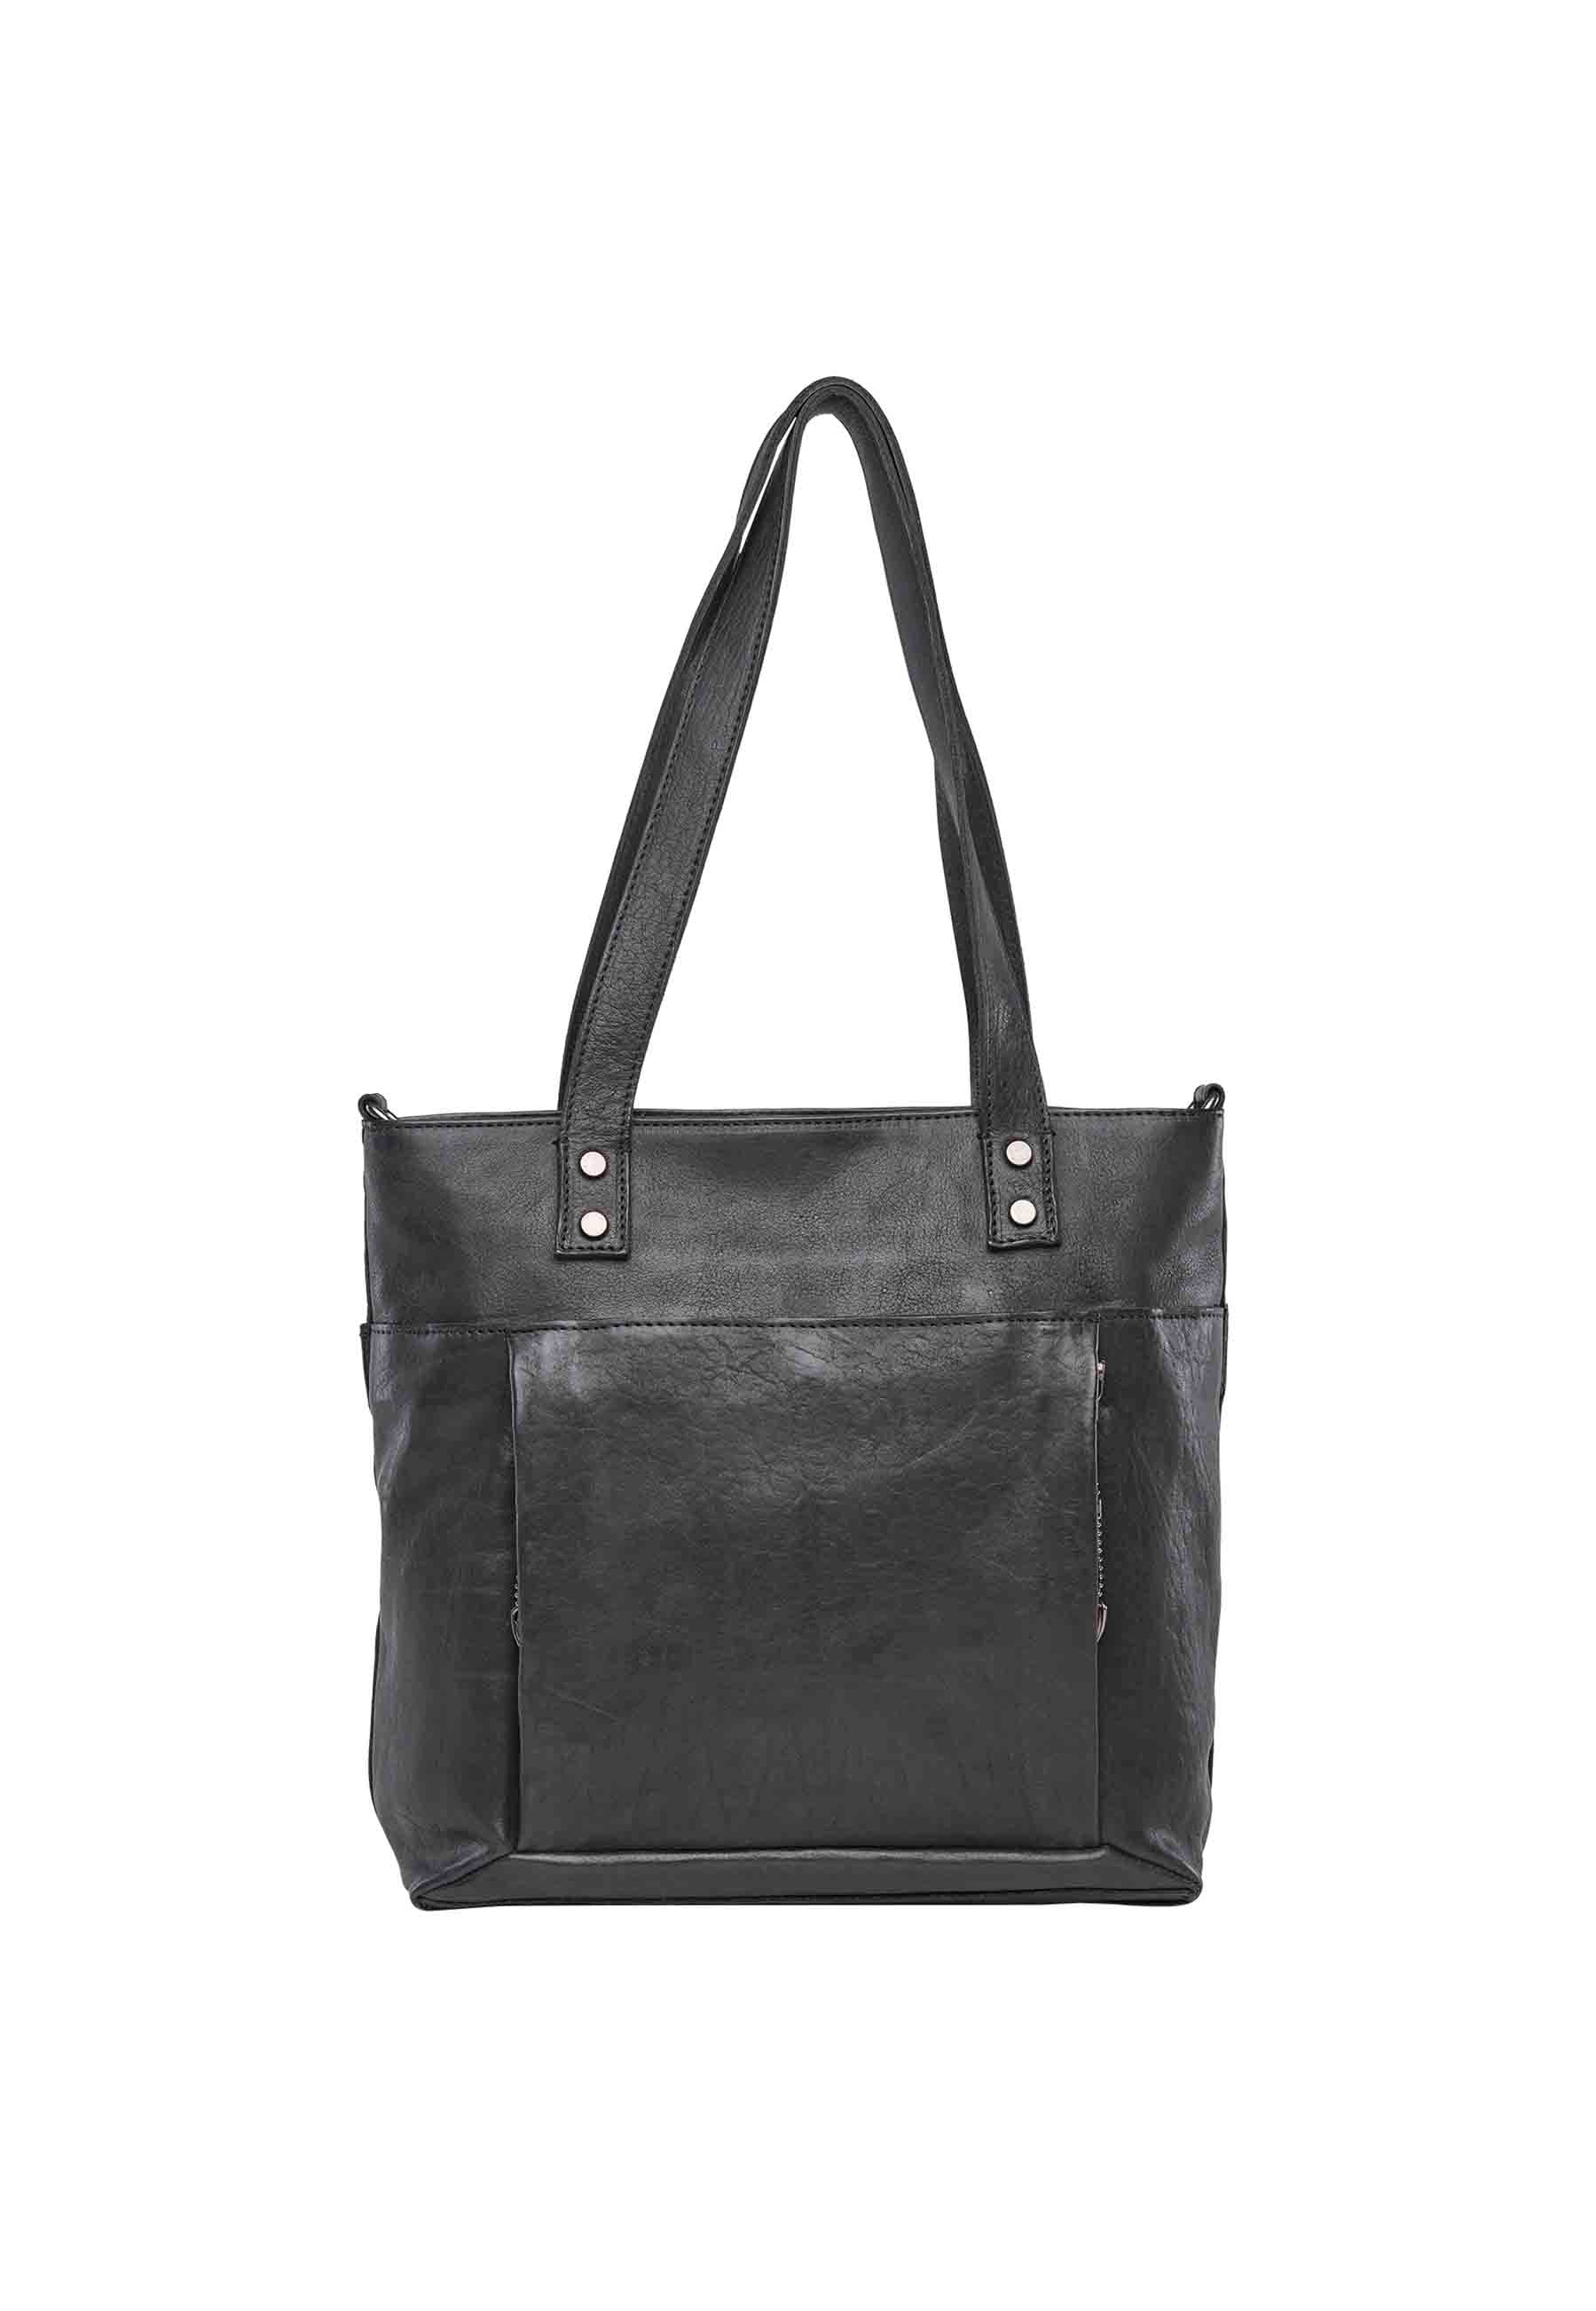 black leather tote for concealed carry holders